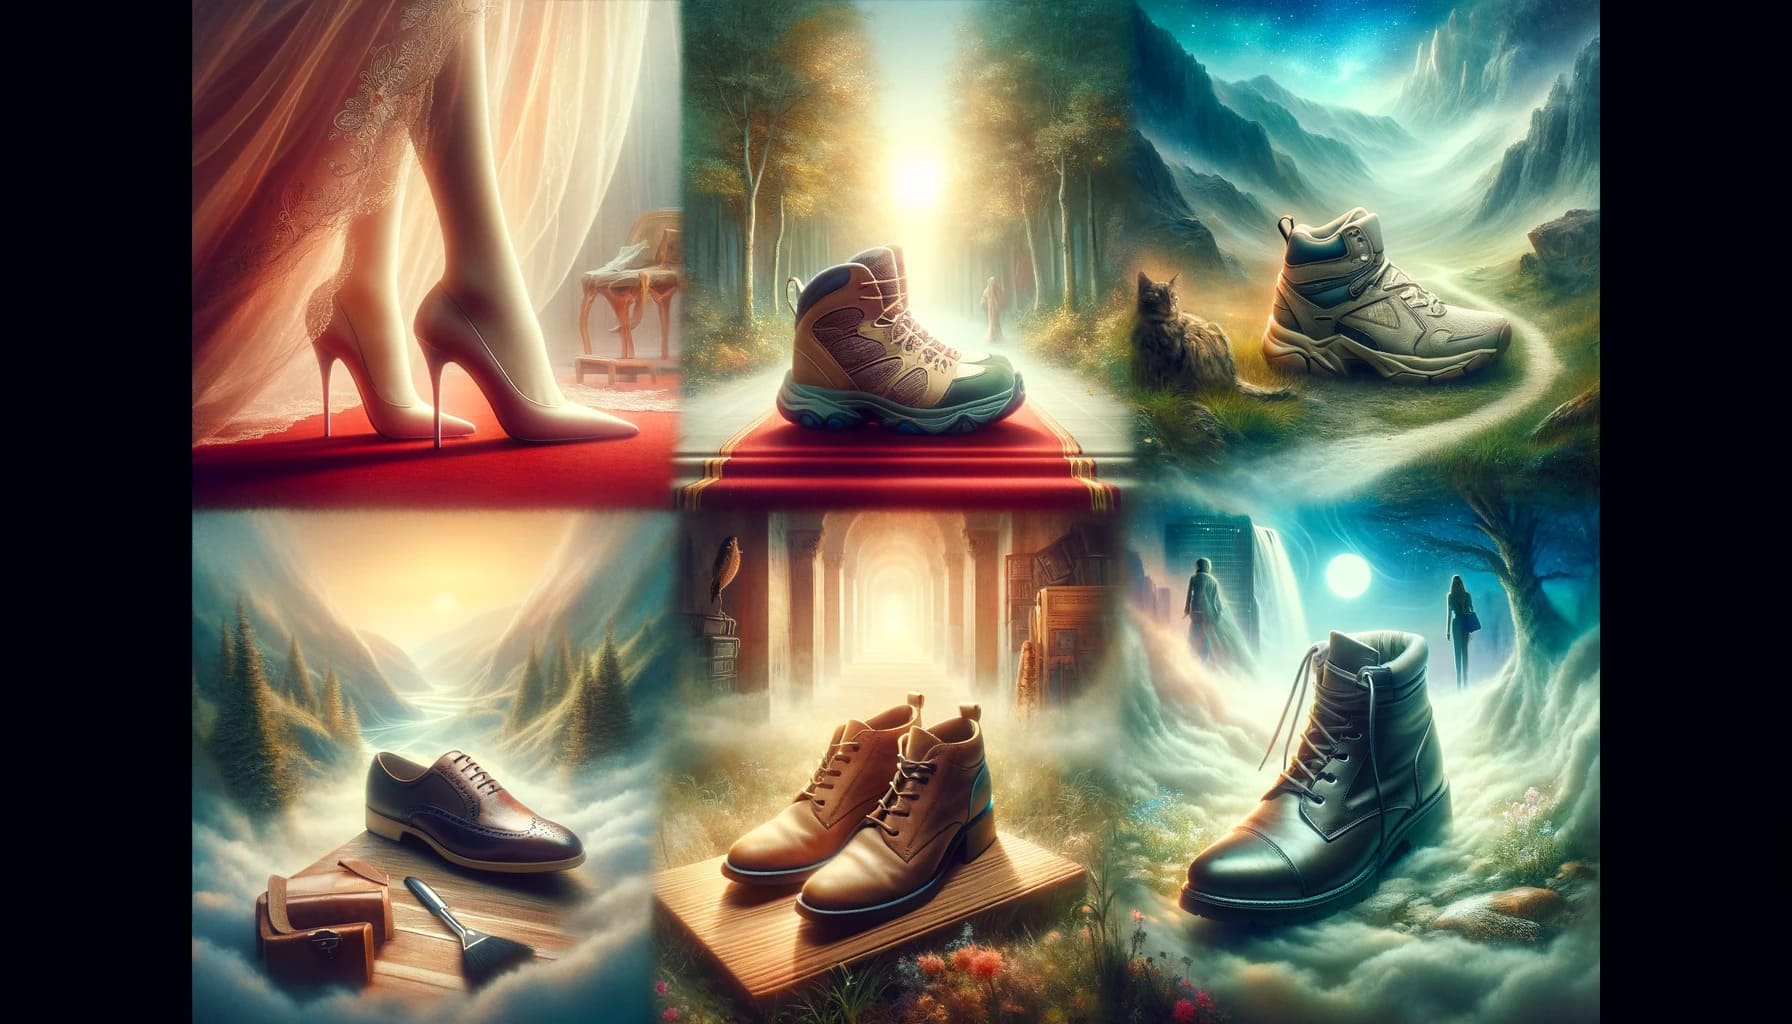 An ethereal dreamlike scene focusing on various shoes in different contexts to symbolize spiritual meanings. The image shows a variety of shoes each